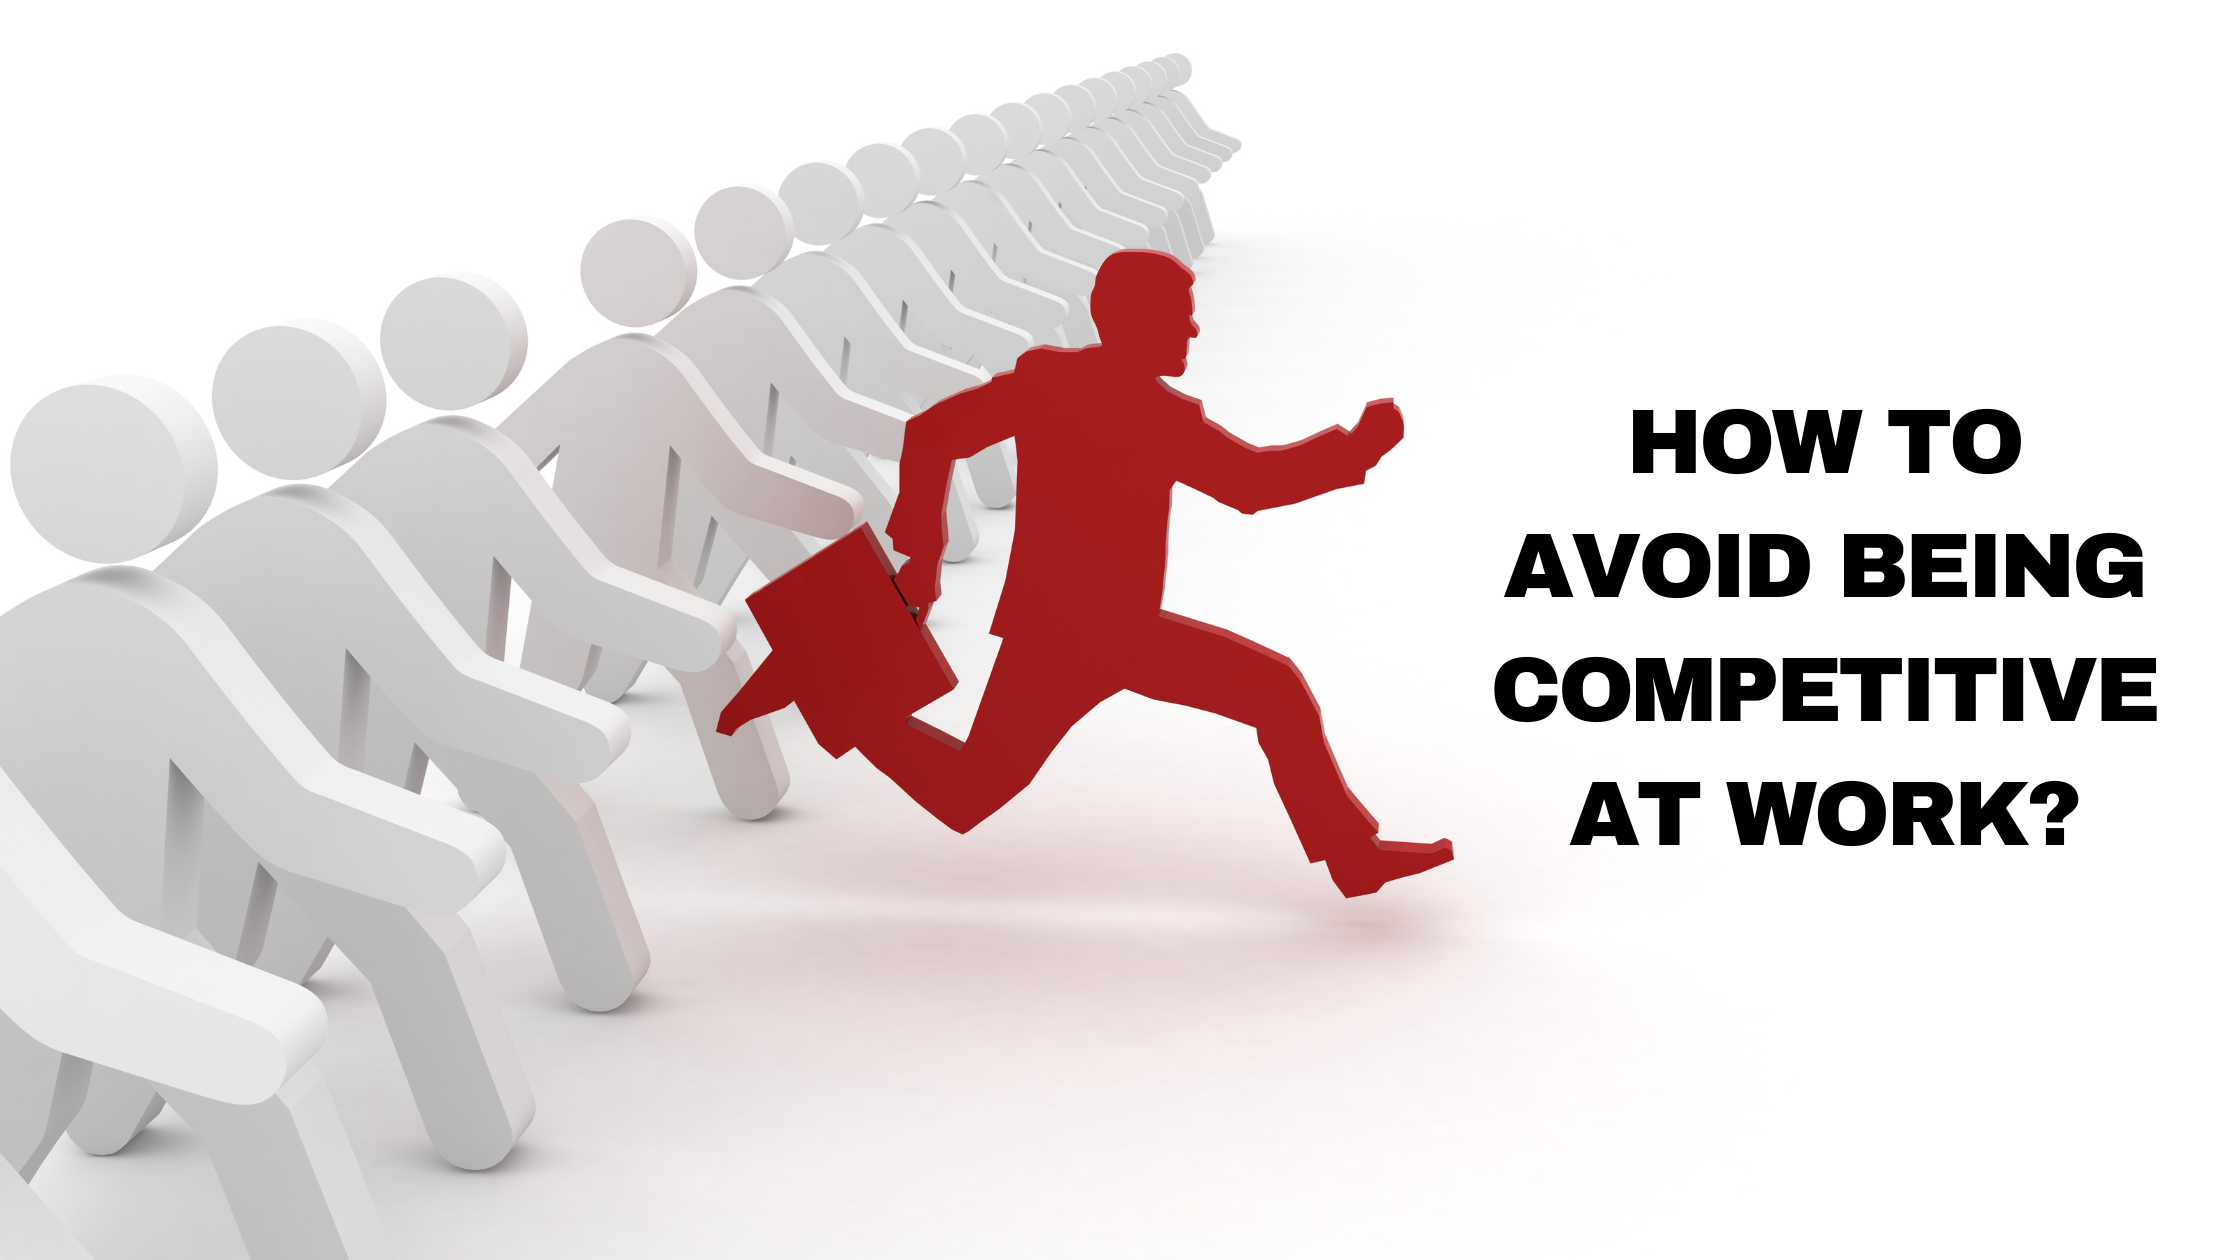 How to avoid being competitive at work